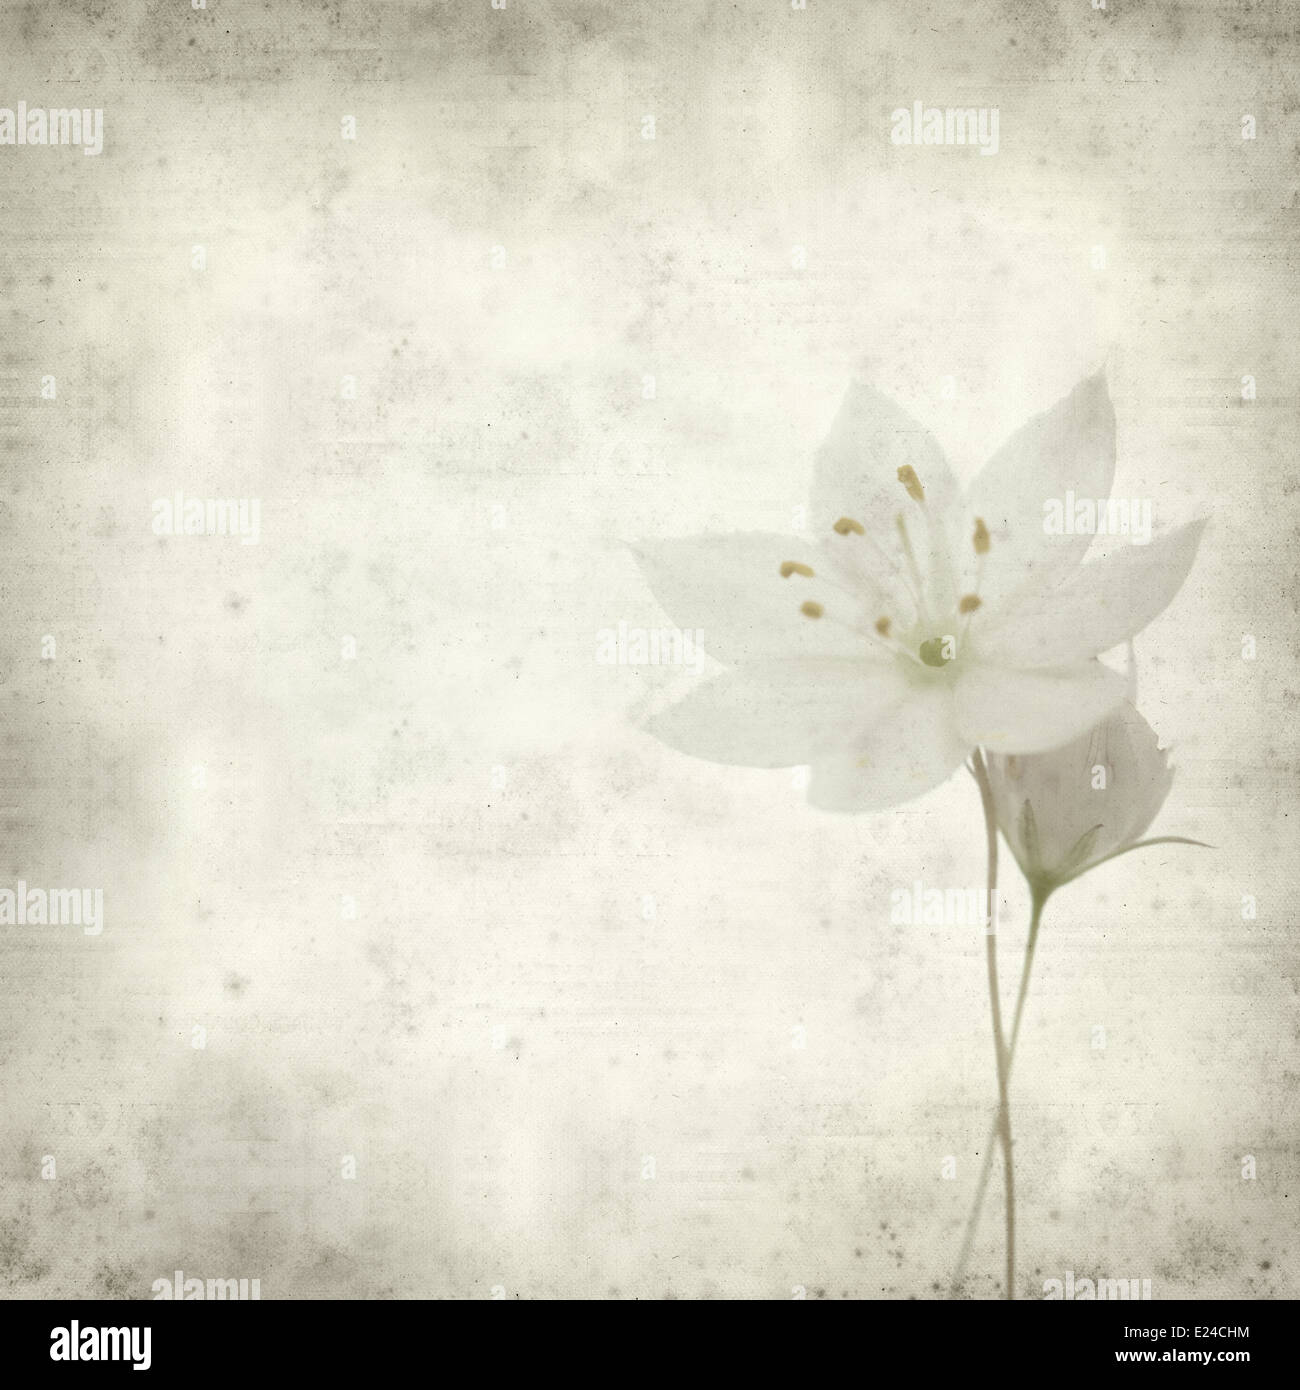 textured old paper background with arctic starflower Stock Photo